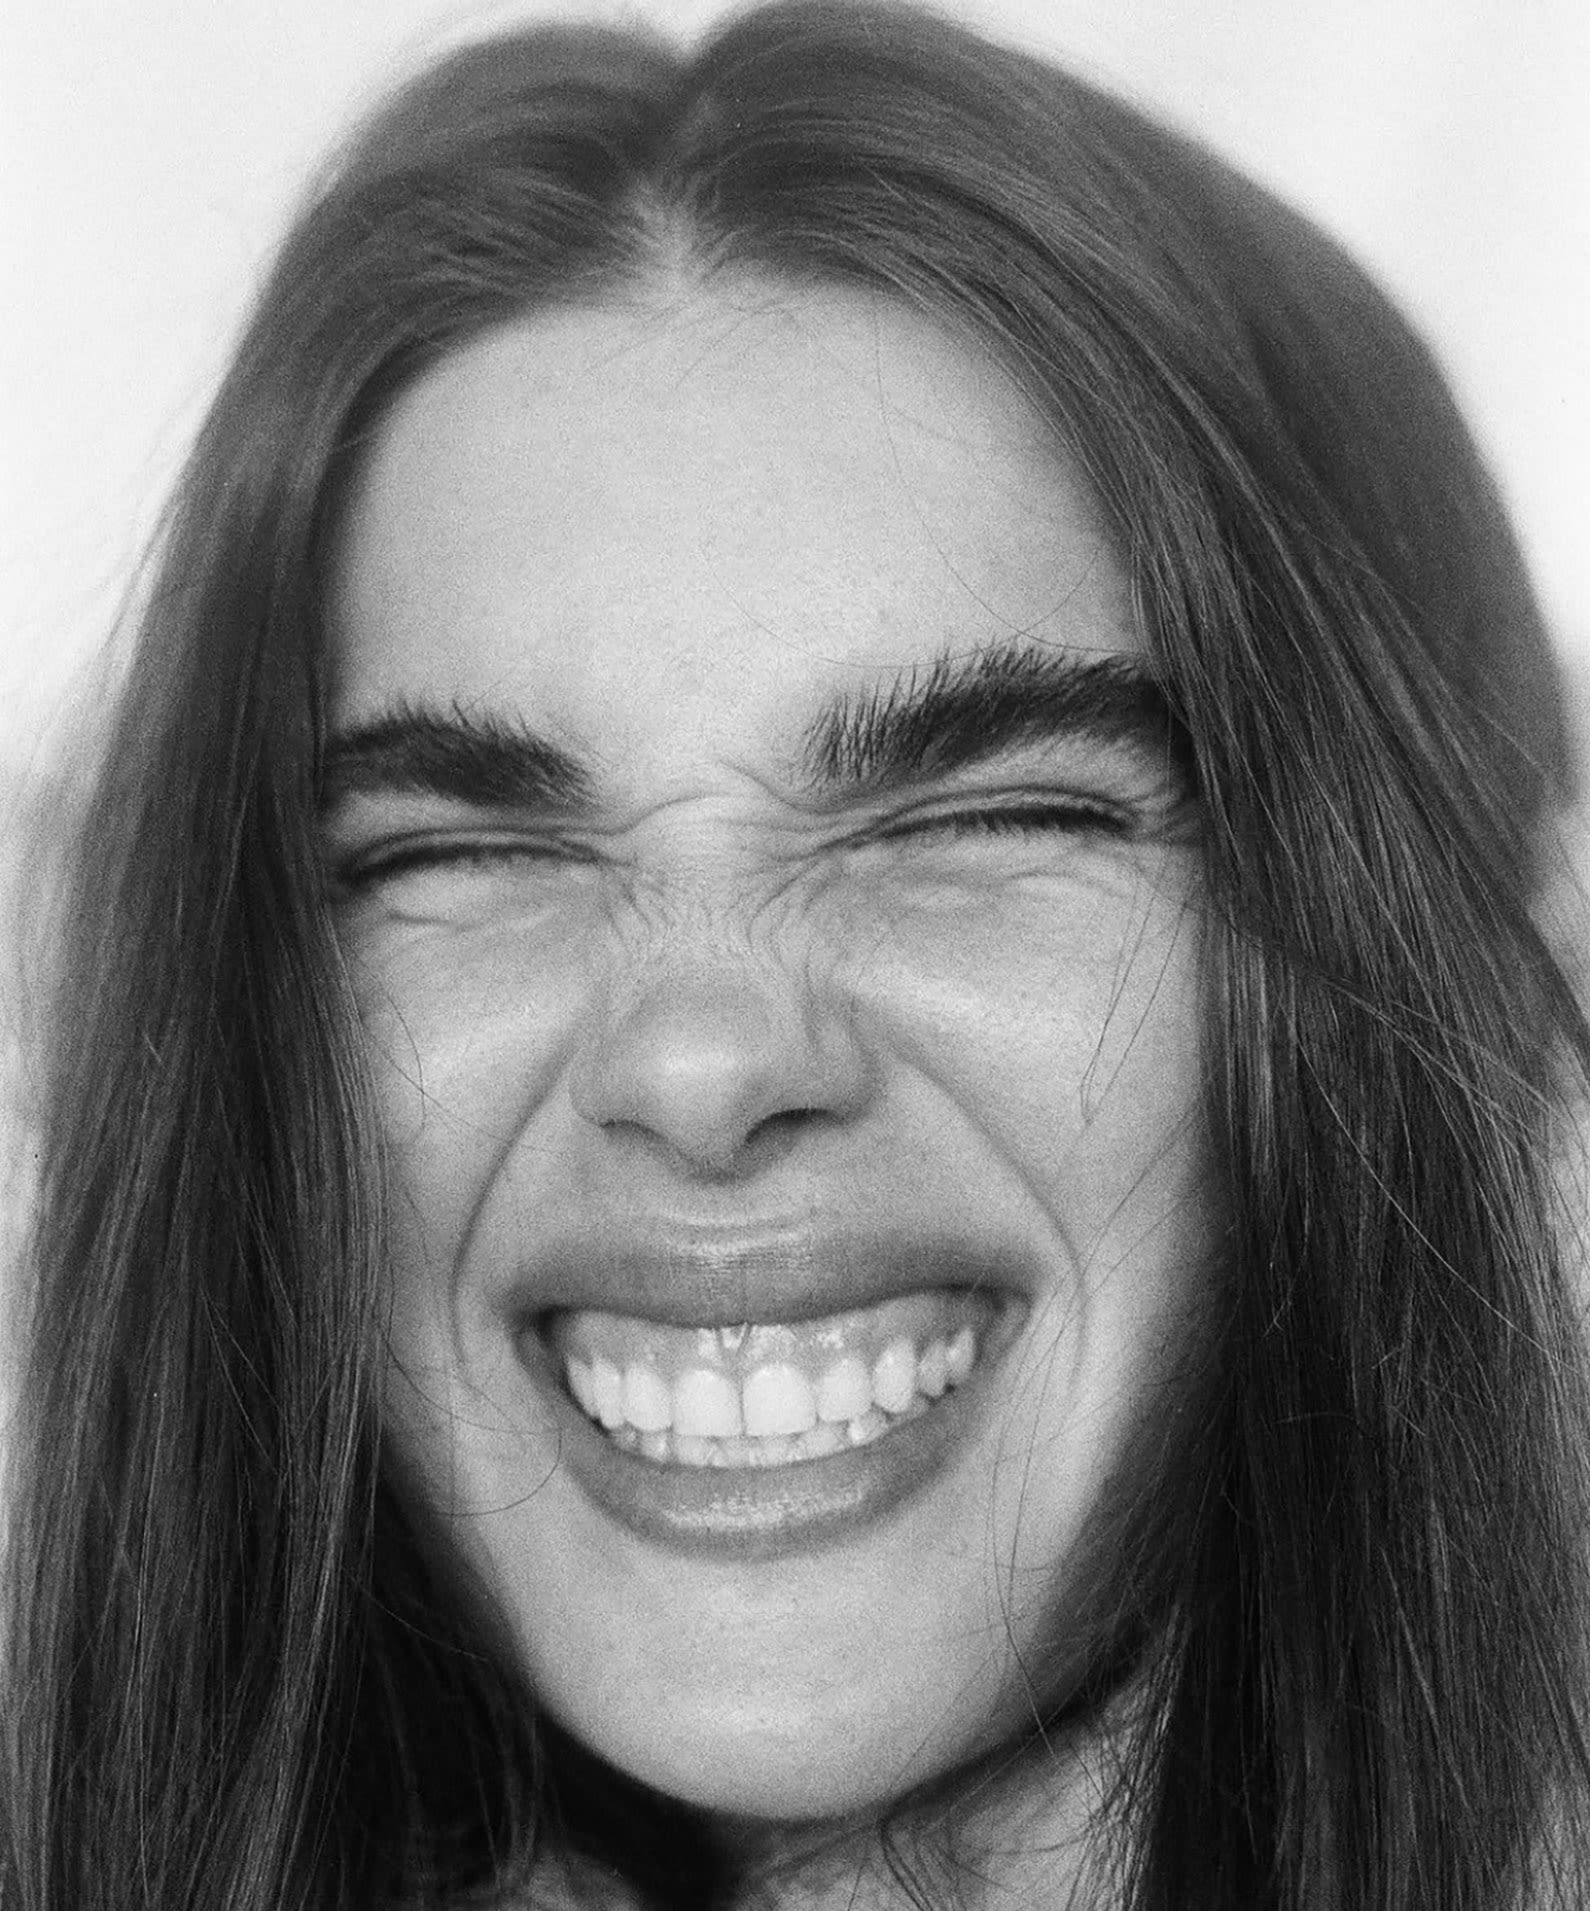 Girl scrunching her face in a black and white photograph.